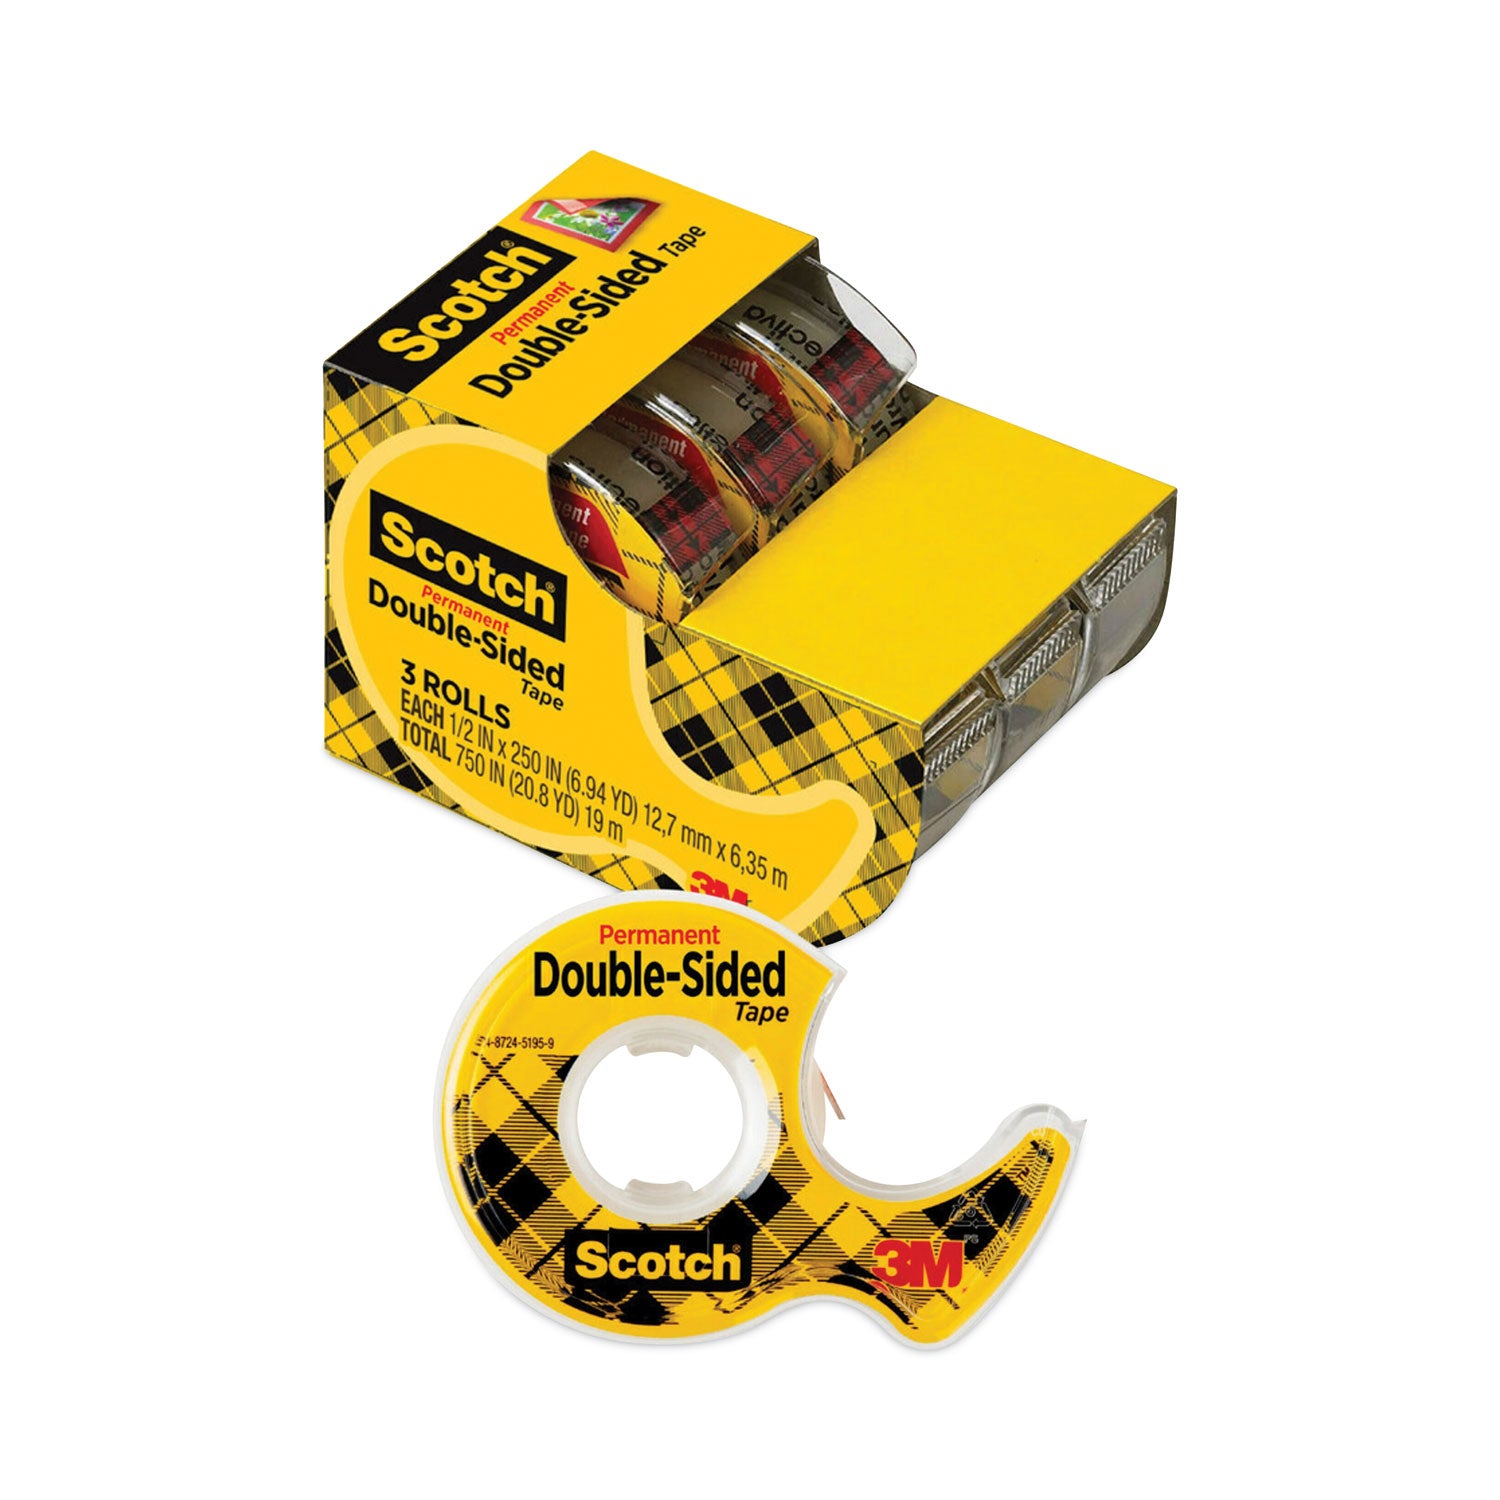 Double-Sided Permanent Tape in Handheld Dispenser, 1" Core, 0.5" x 20.83 ft, Clear, 3/Pack - 